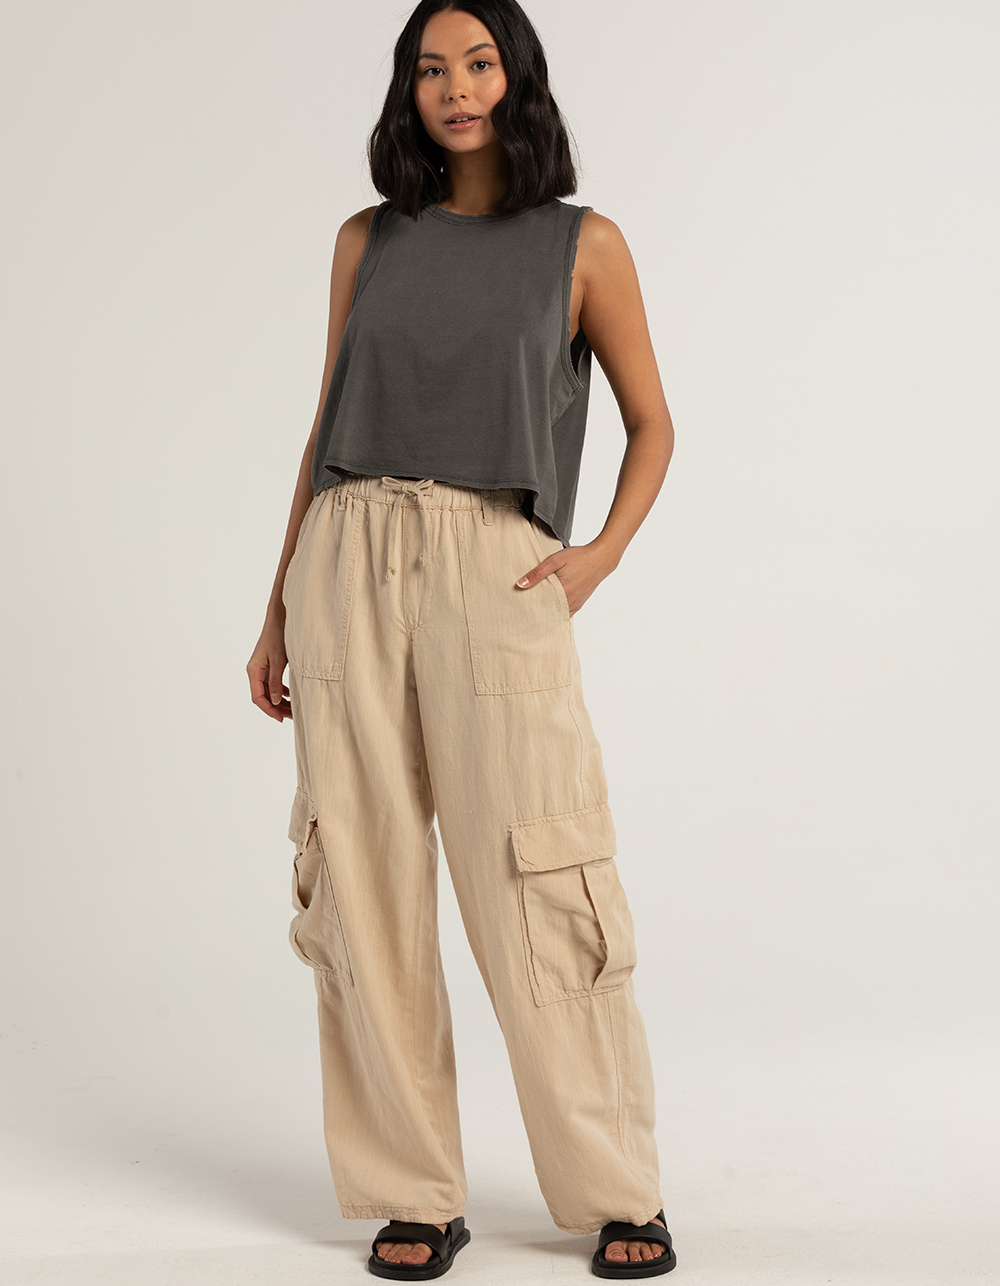 The North Face Drawstring Linen Pants for Women